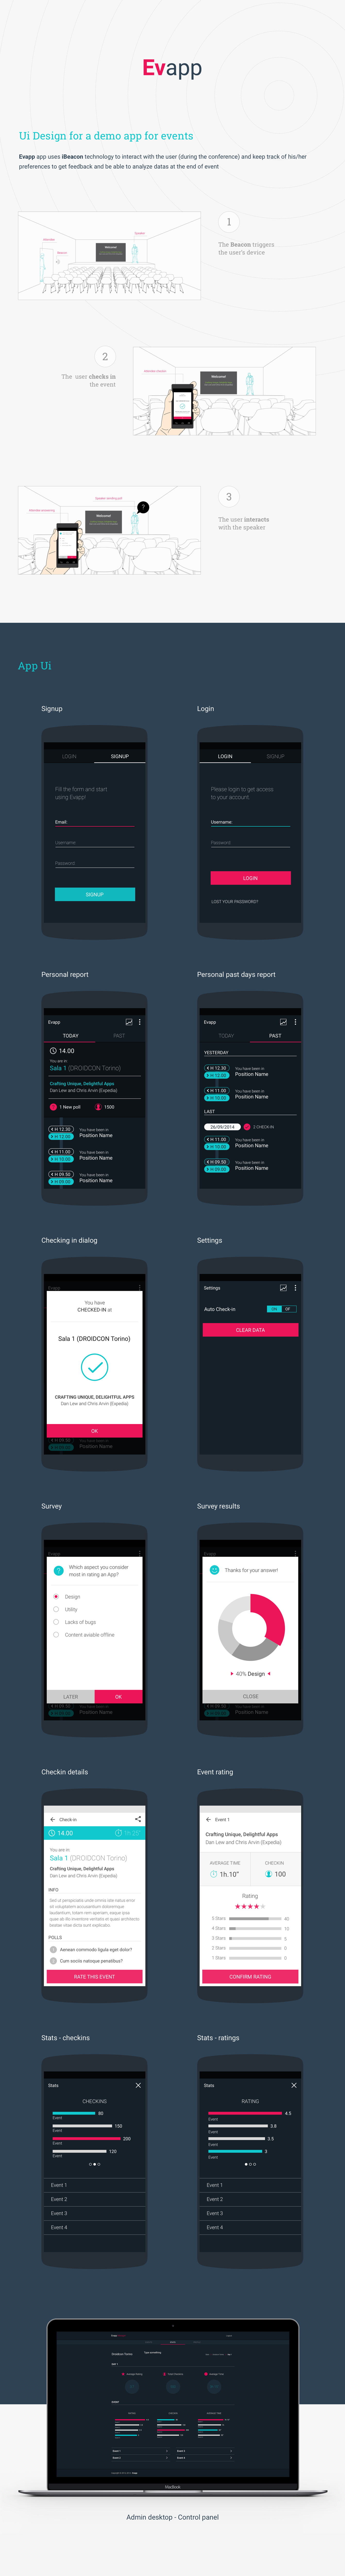 UI ux beacon Interface Event android